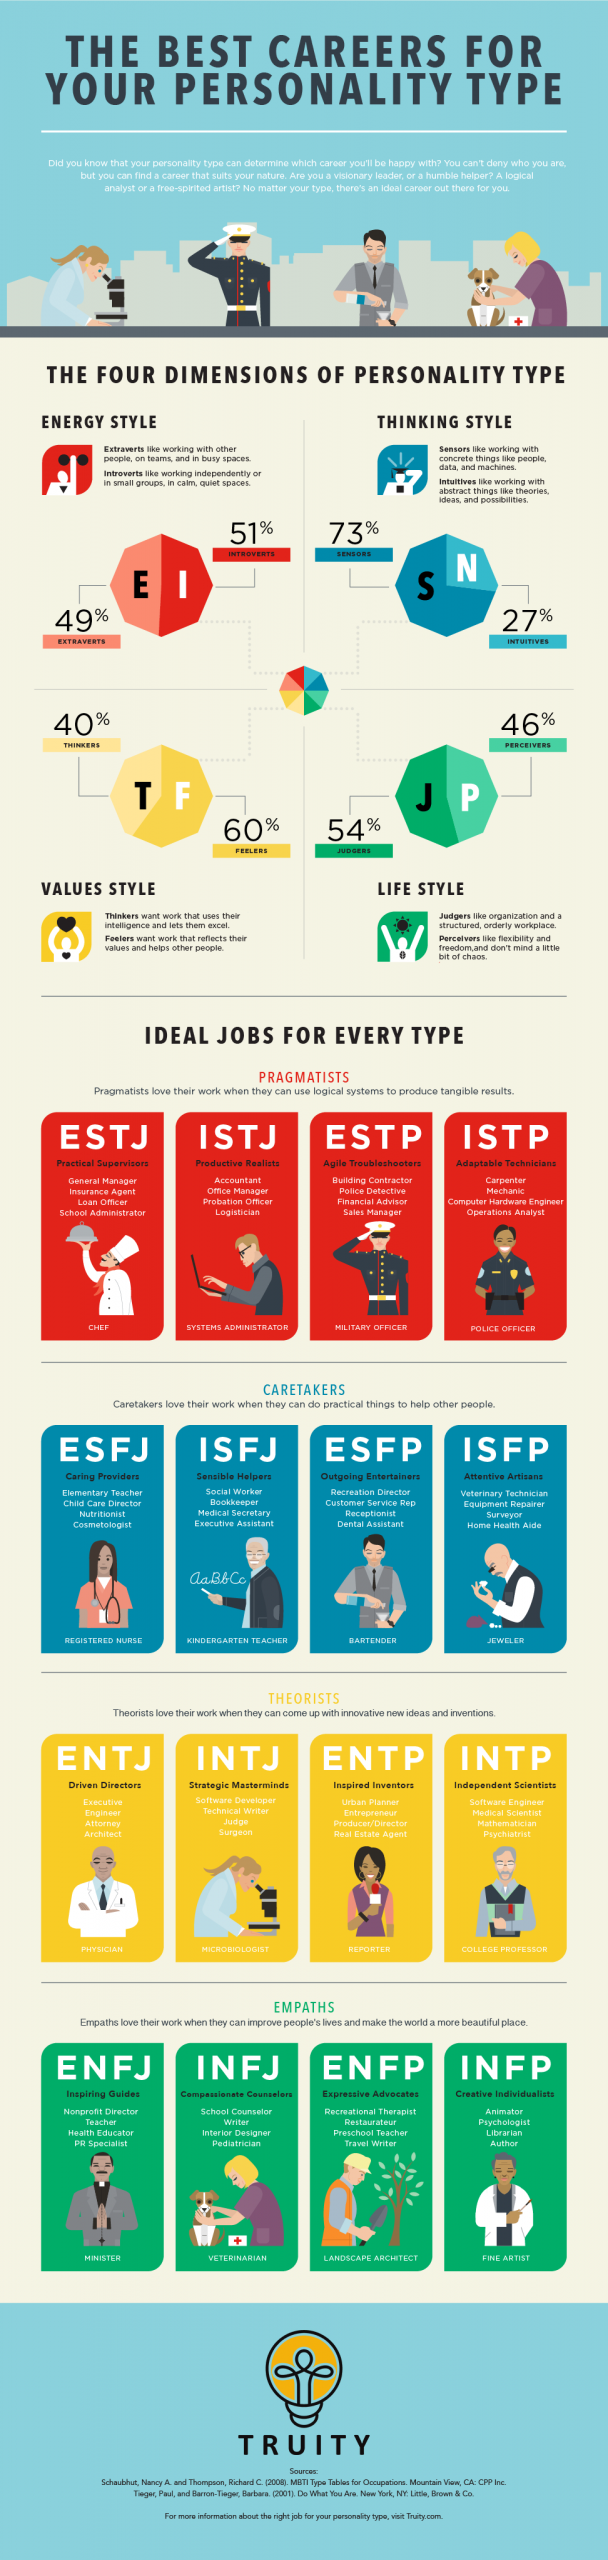 personality type